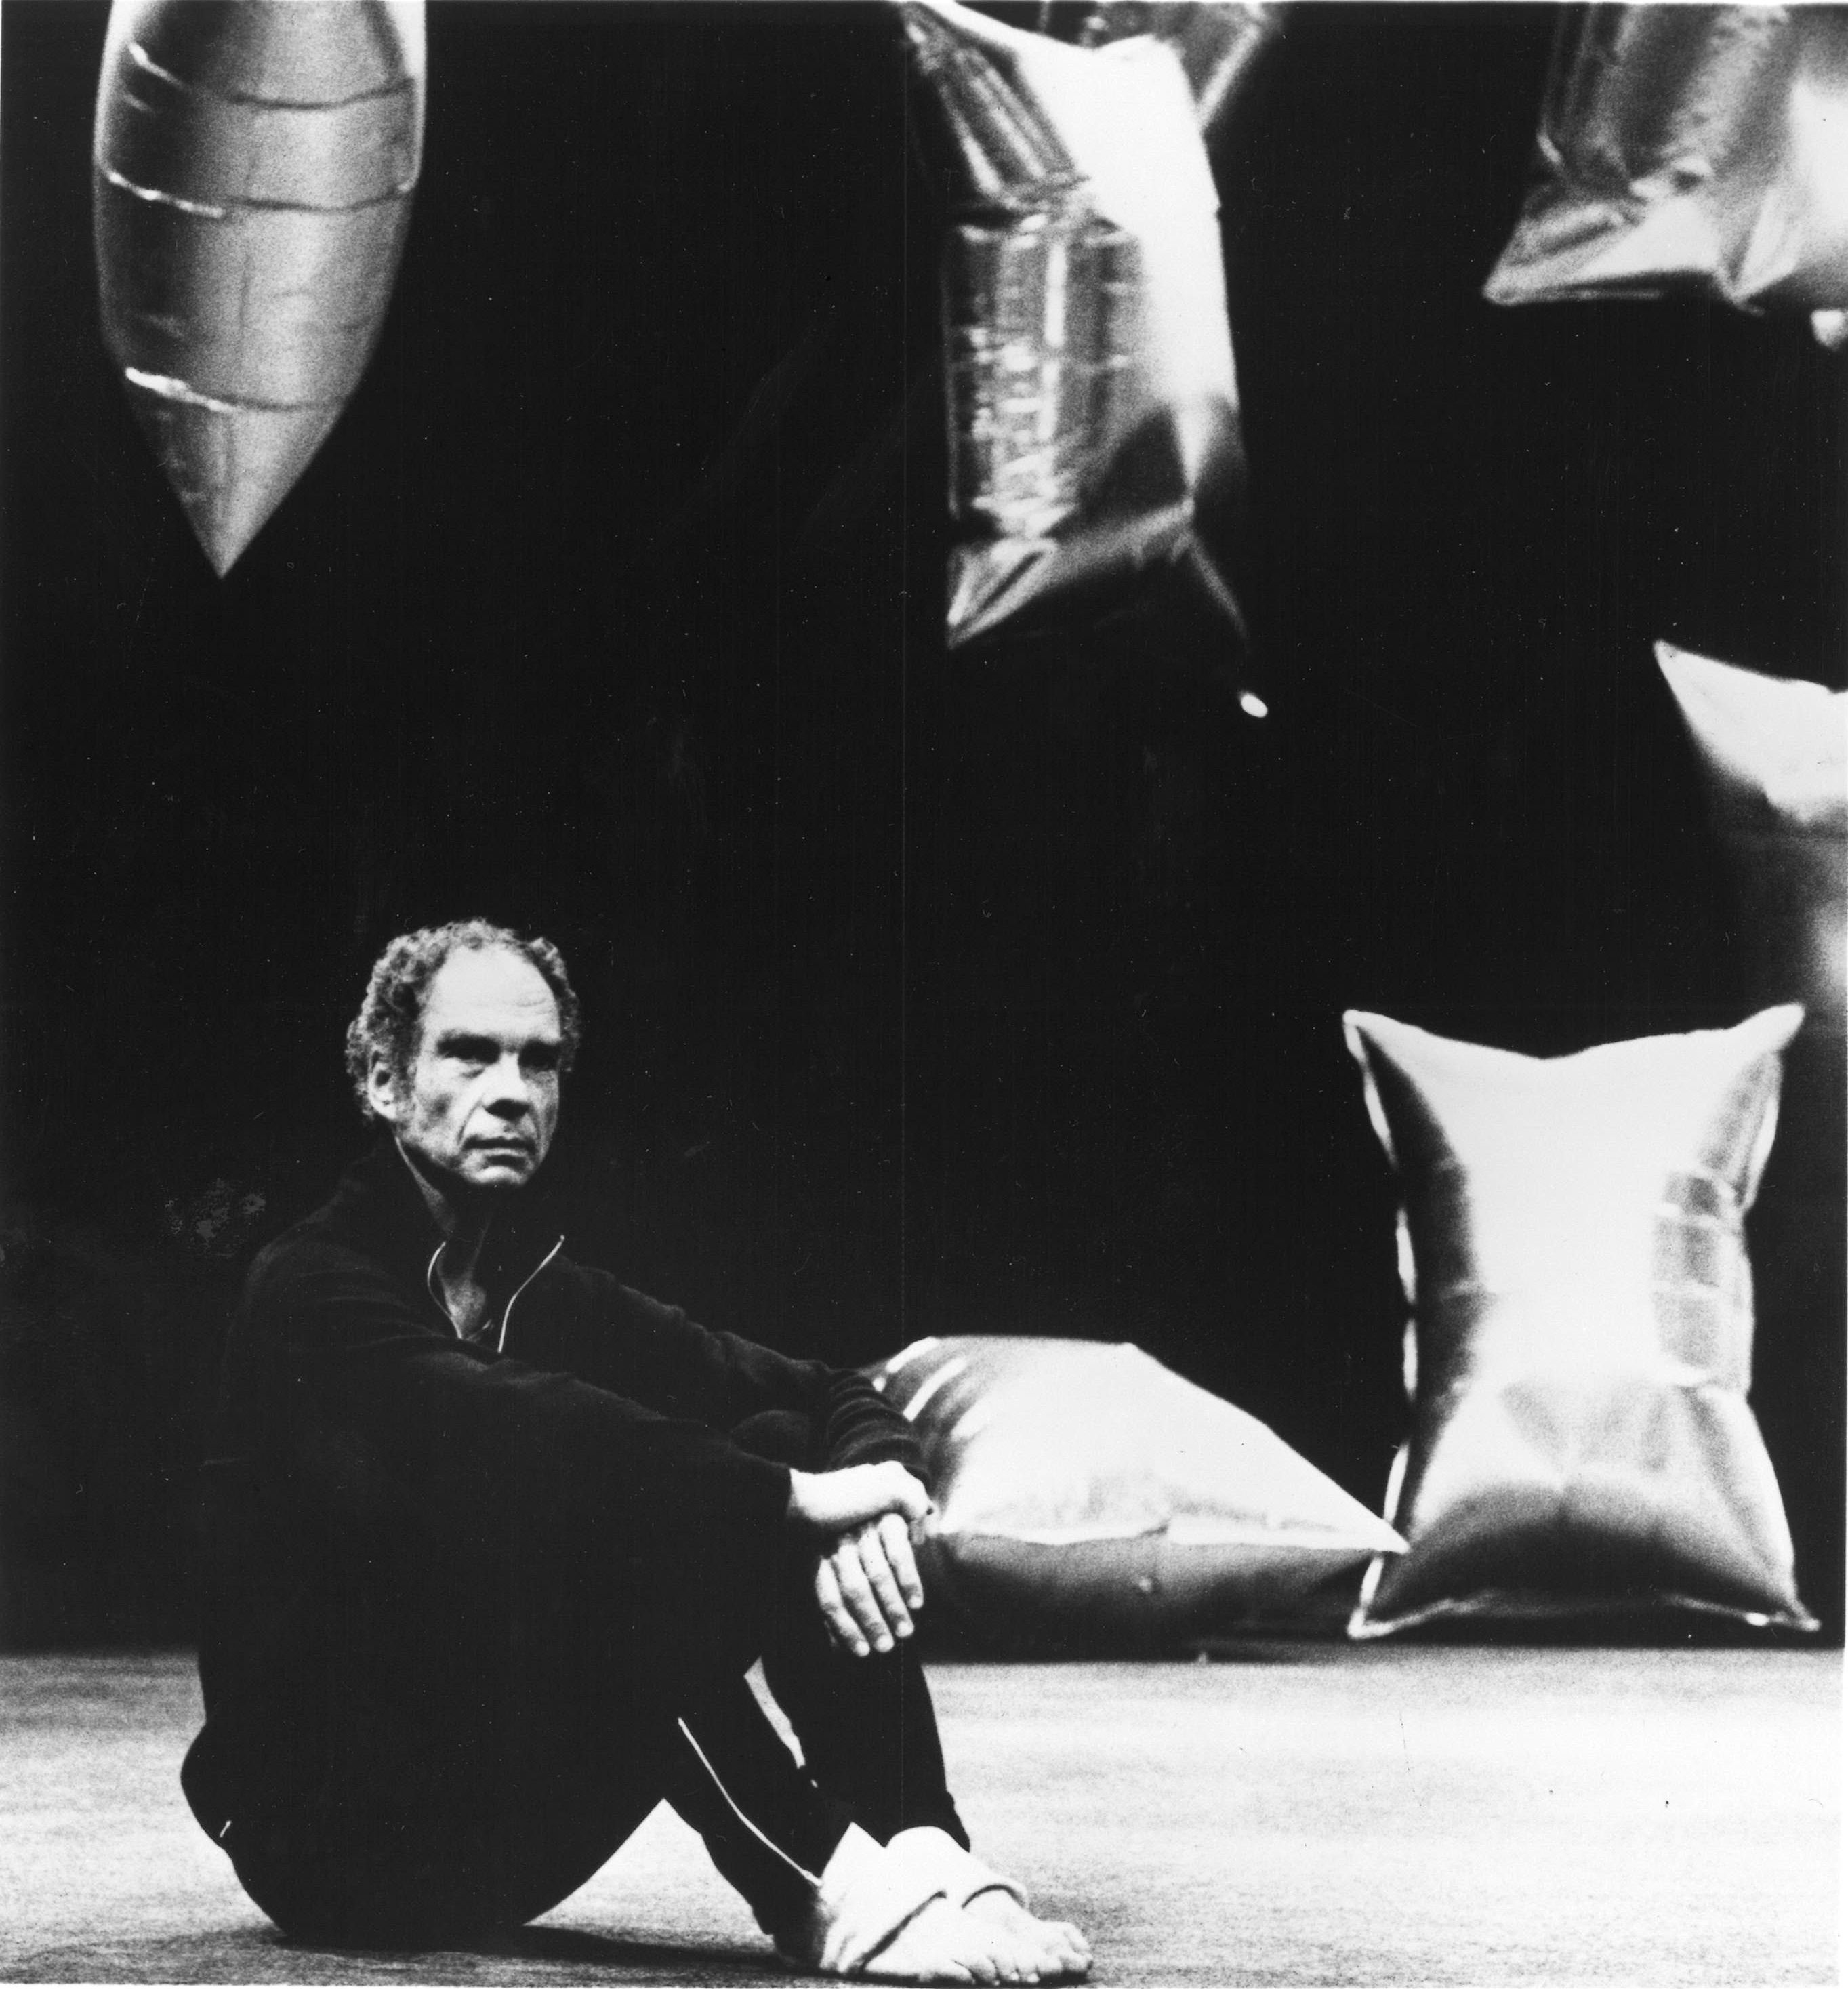 Merce Cunningham, in a black tracksuit, sits with his knees pulled up onstage. Behind him, the silver balloons designed by Andy Warhol for Cunningham's RainForest.